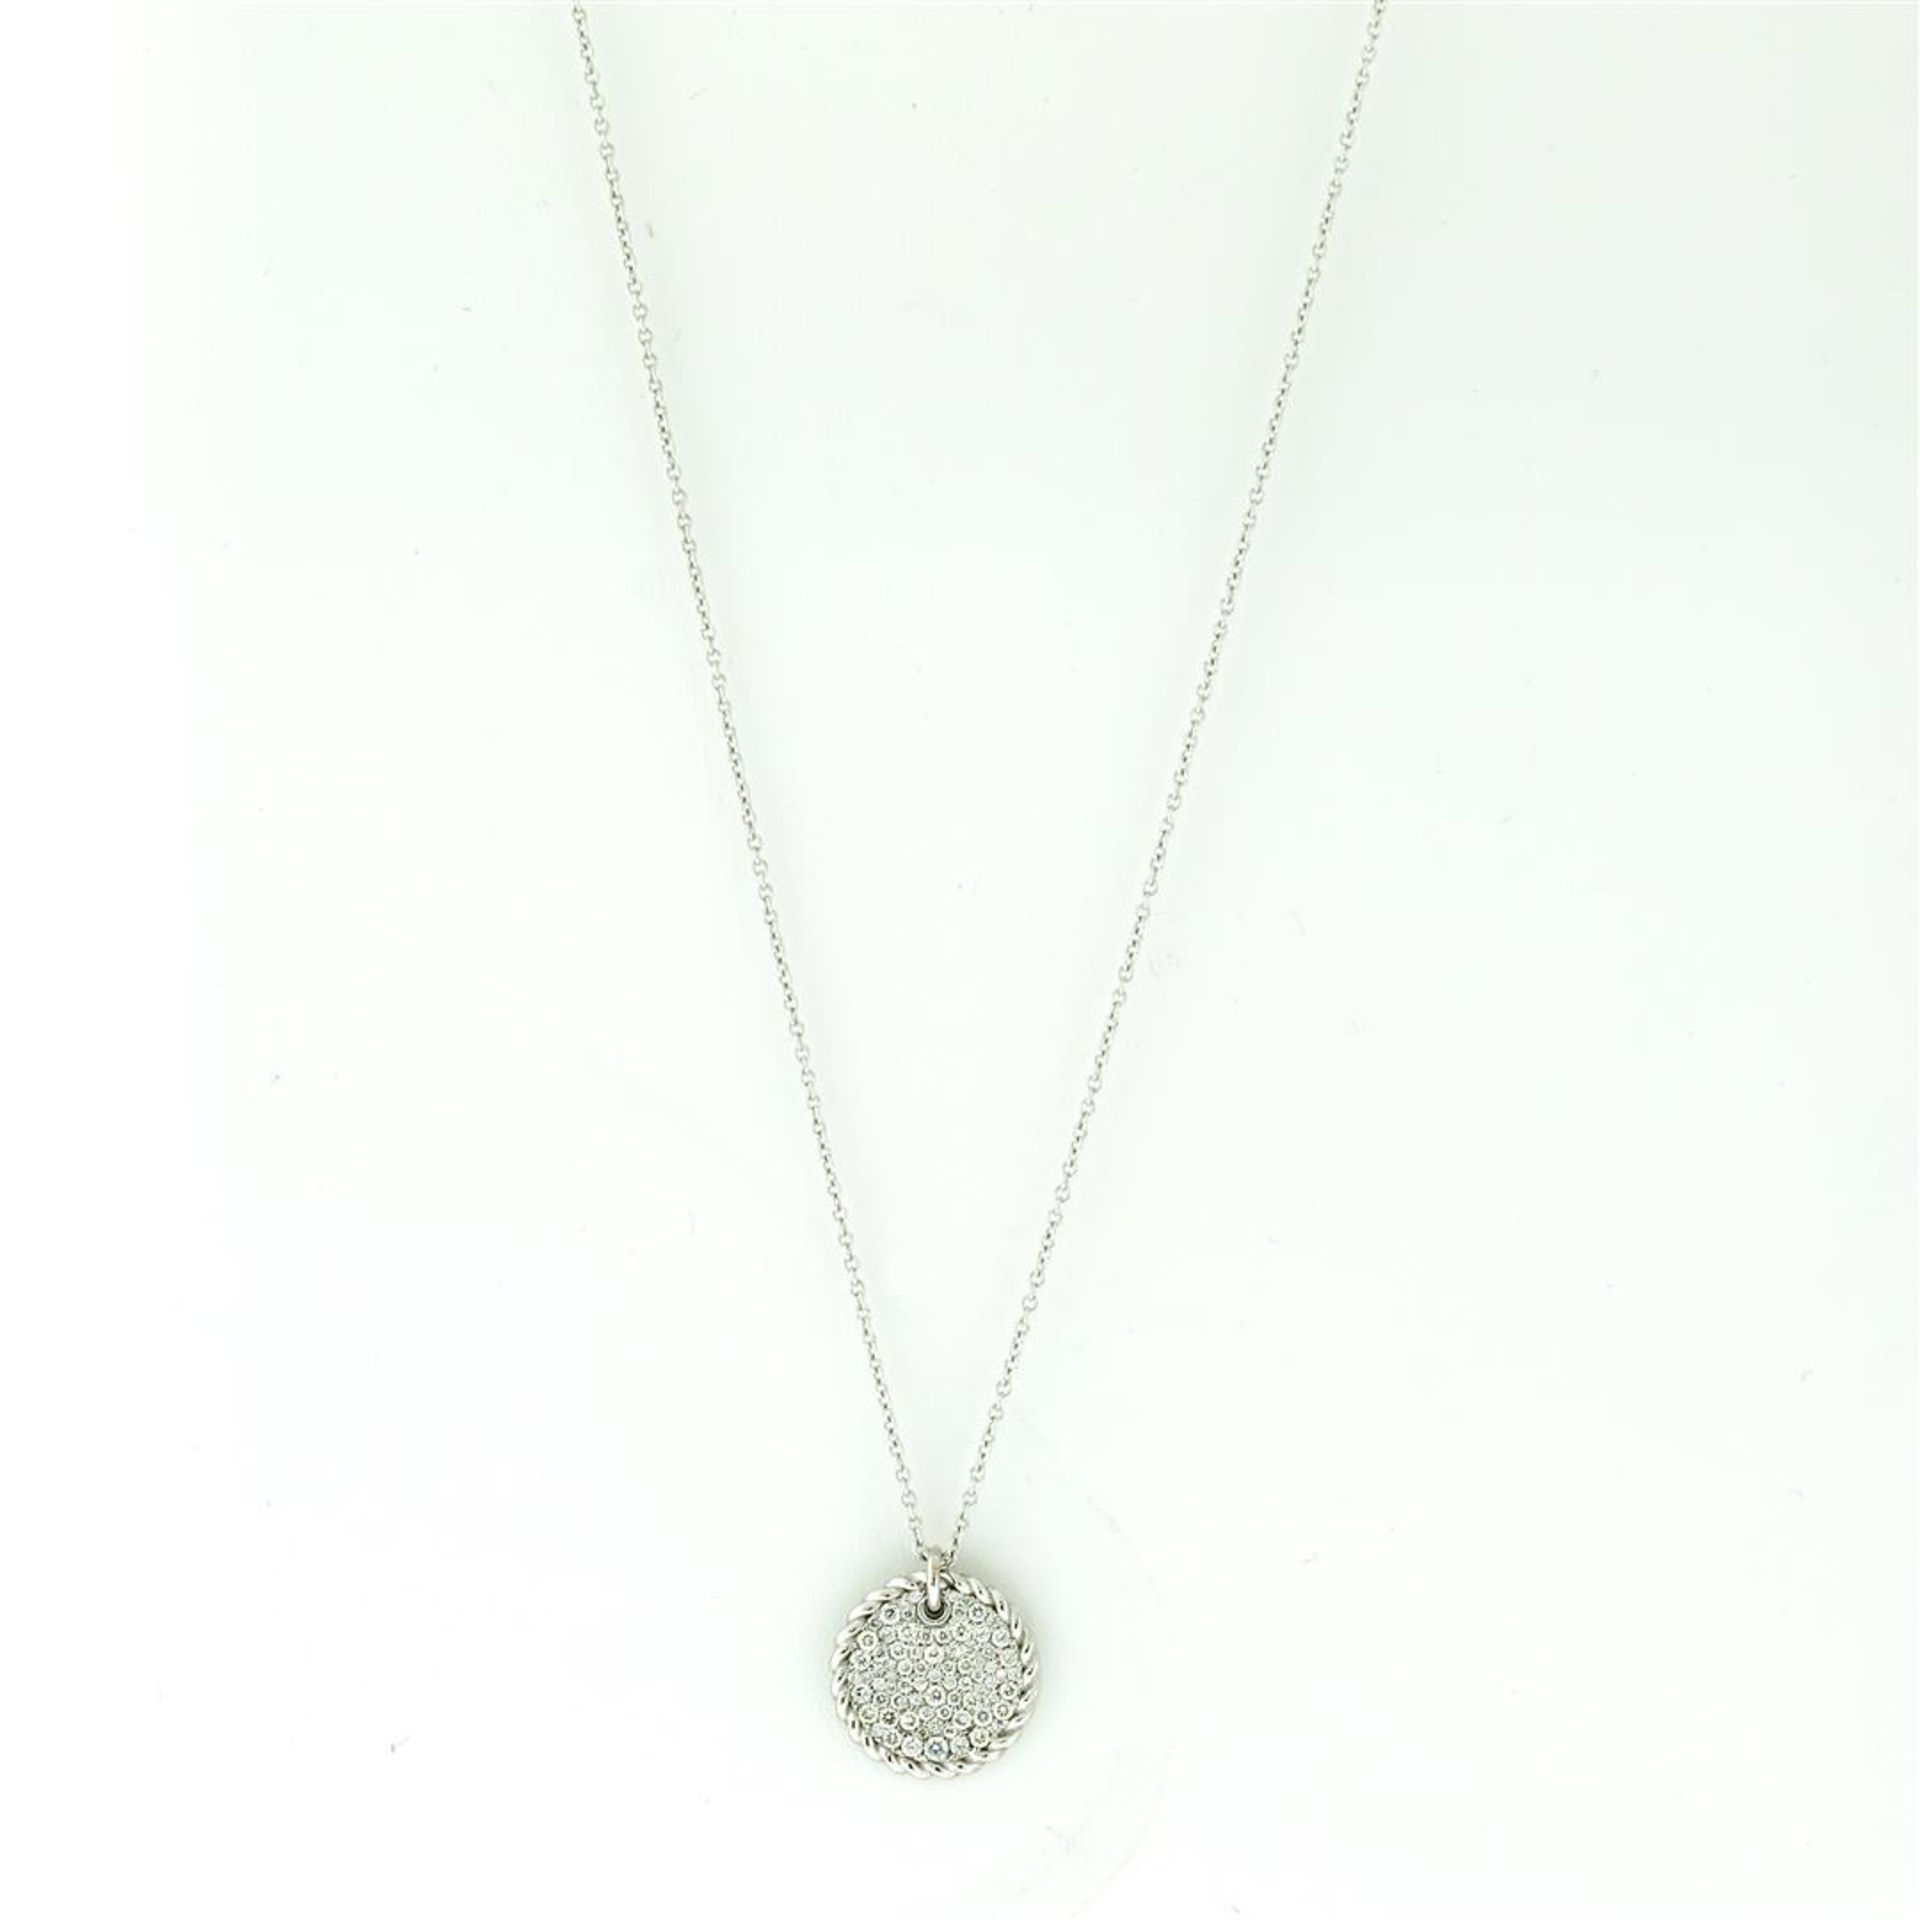 New 18k White Gold Diamond Cable Pendant with with 18K White Gold Chain - Image 4 of 7